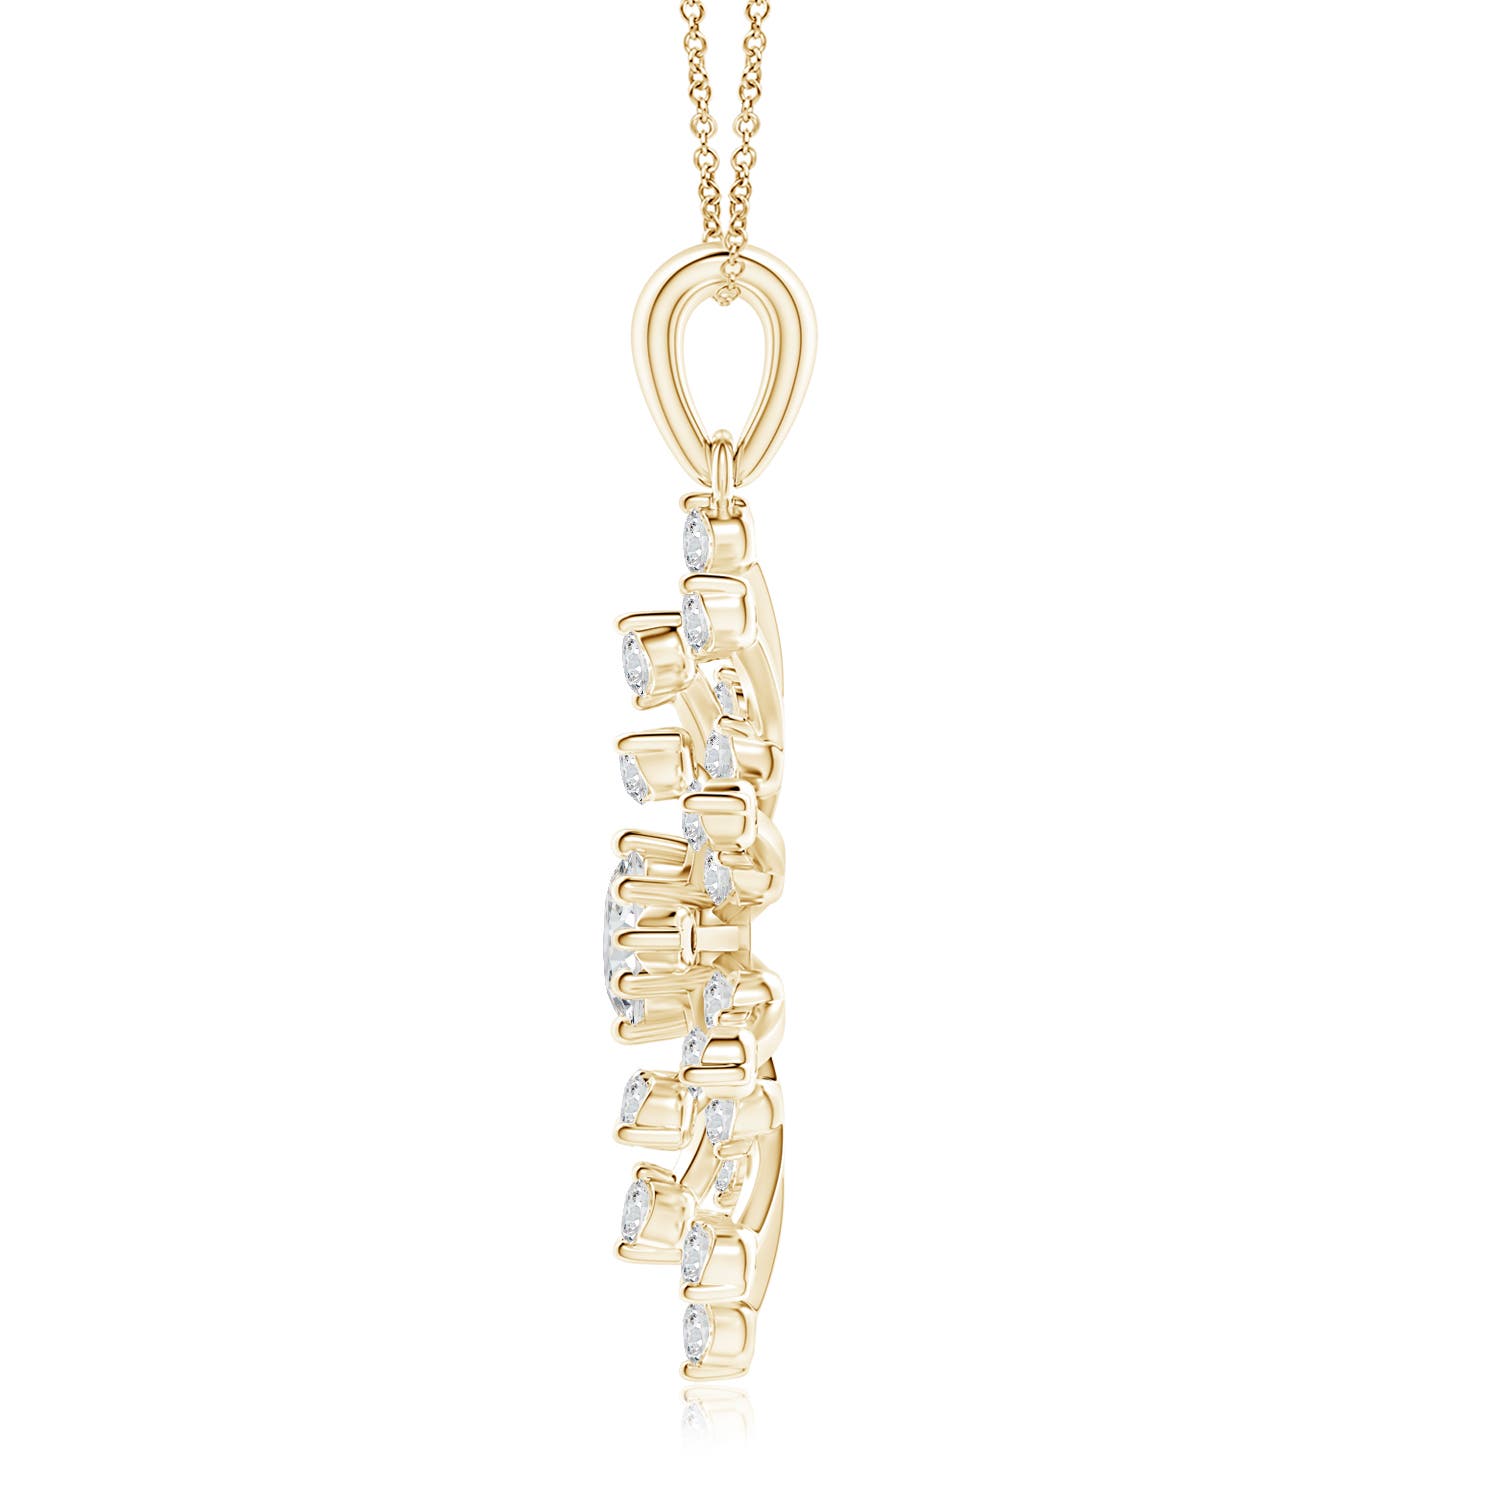 H, SI2 / 0.74 CT / 14 KT Yellow Gold